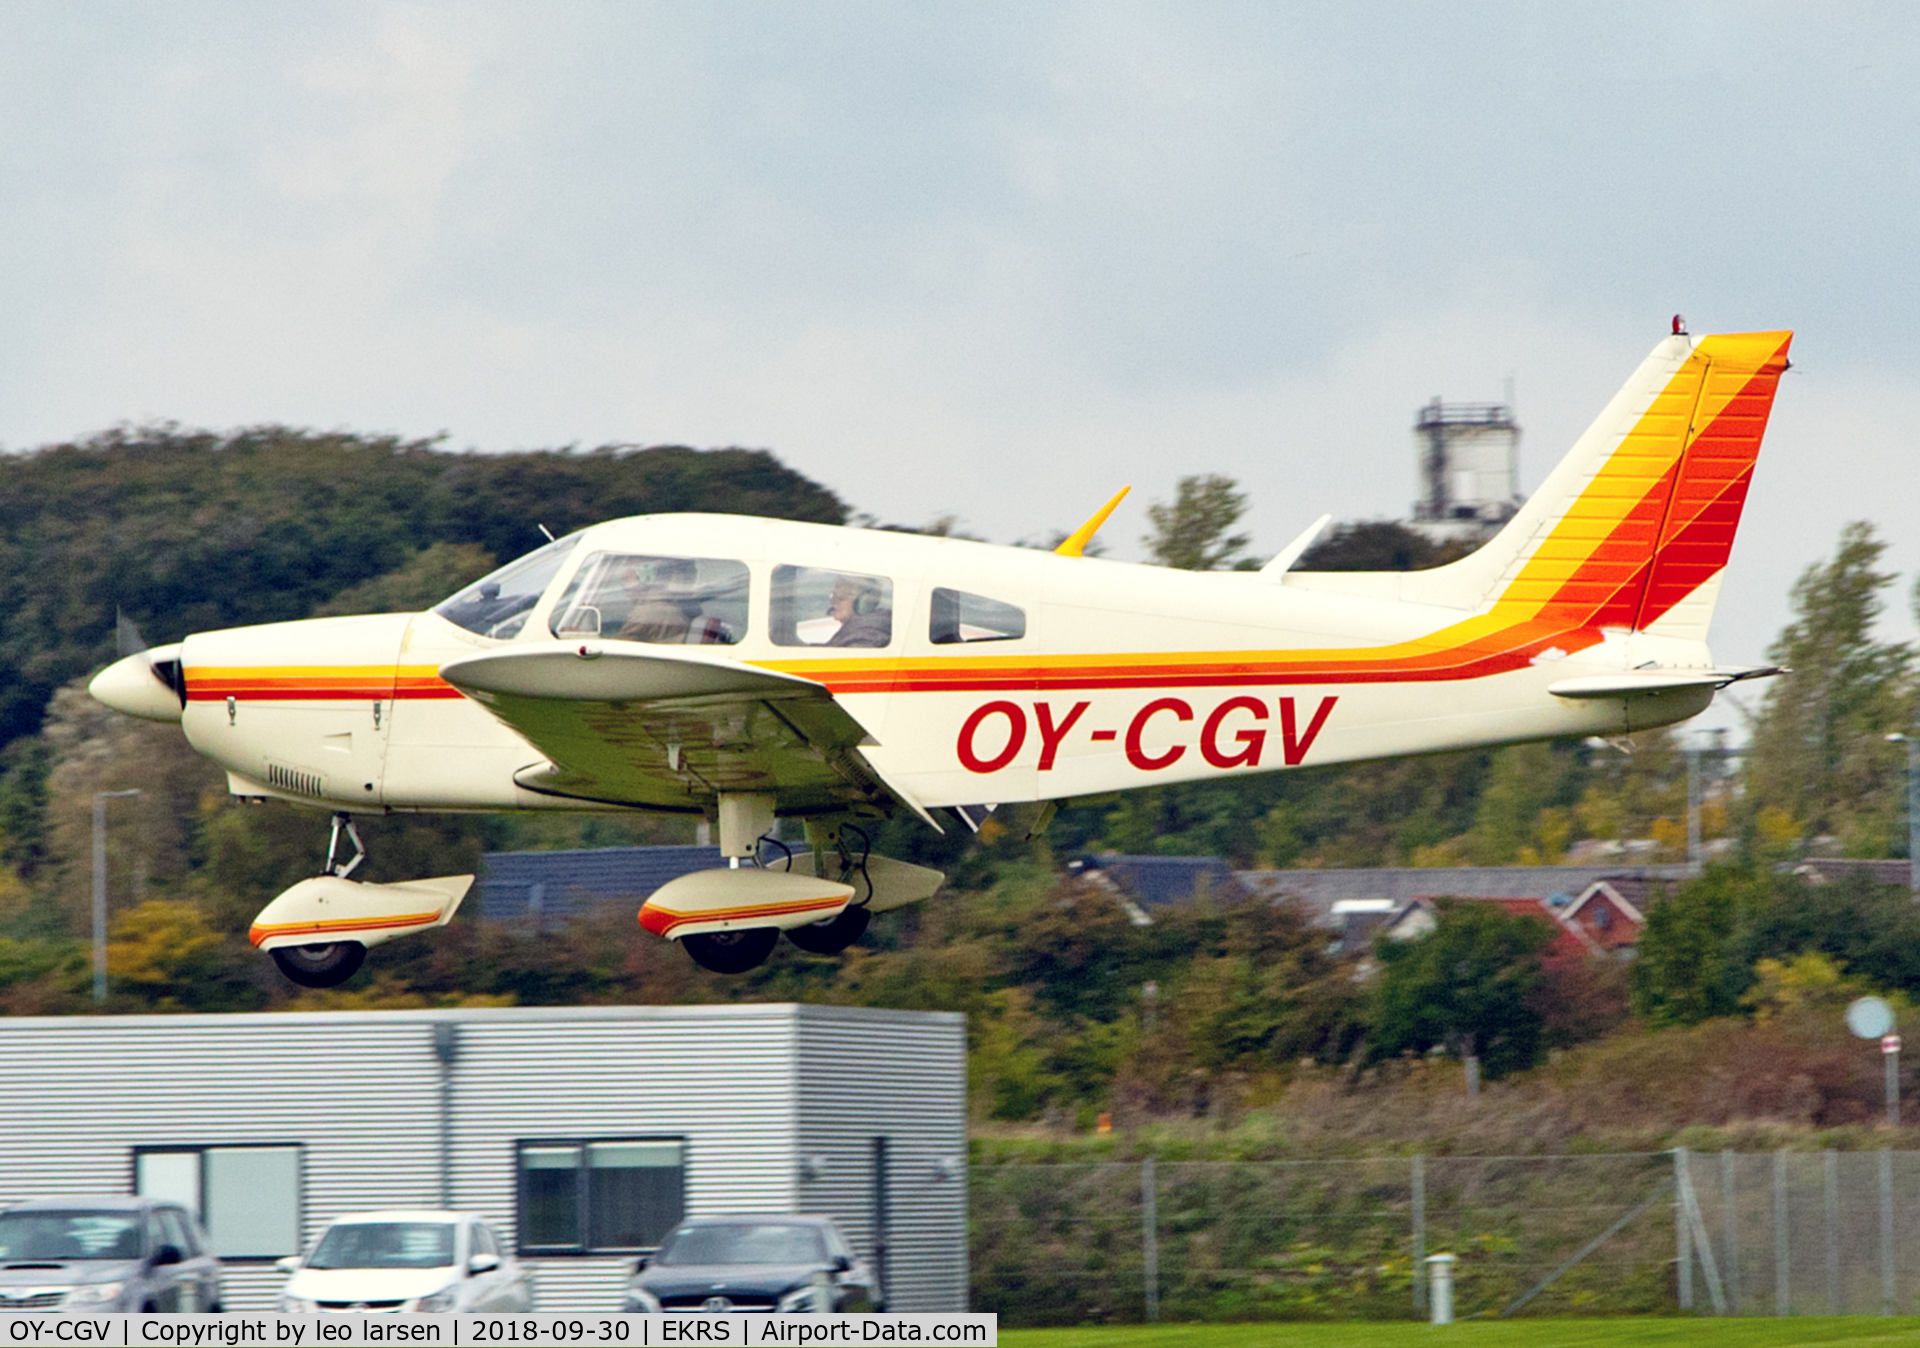 OY-CGV, 1974 Piper PA-28-180 Archer C/N 28-7505088, Ringsted 30.9.2018